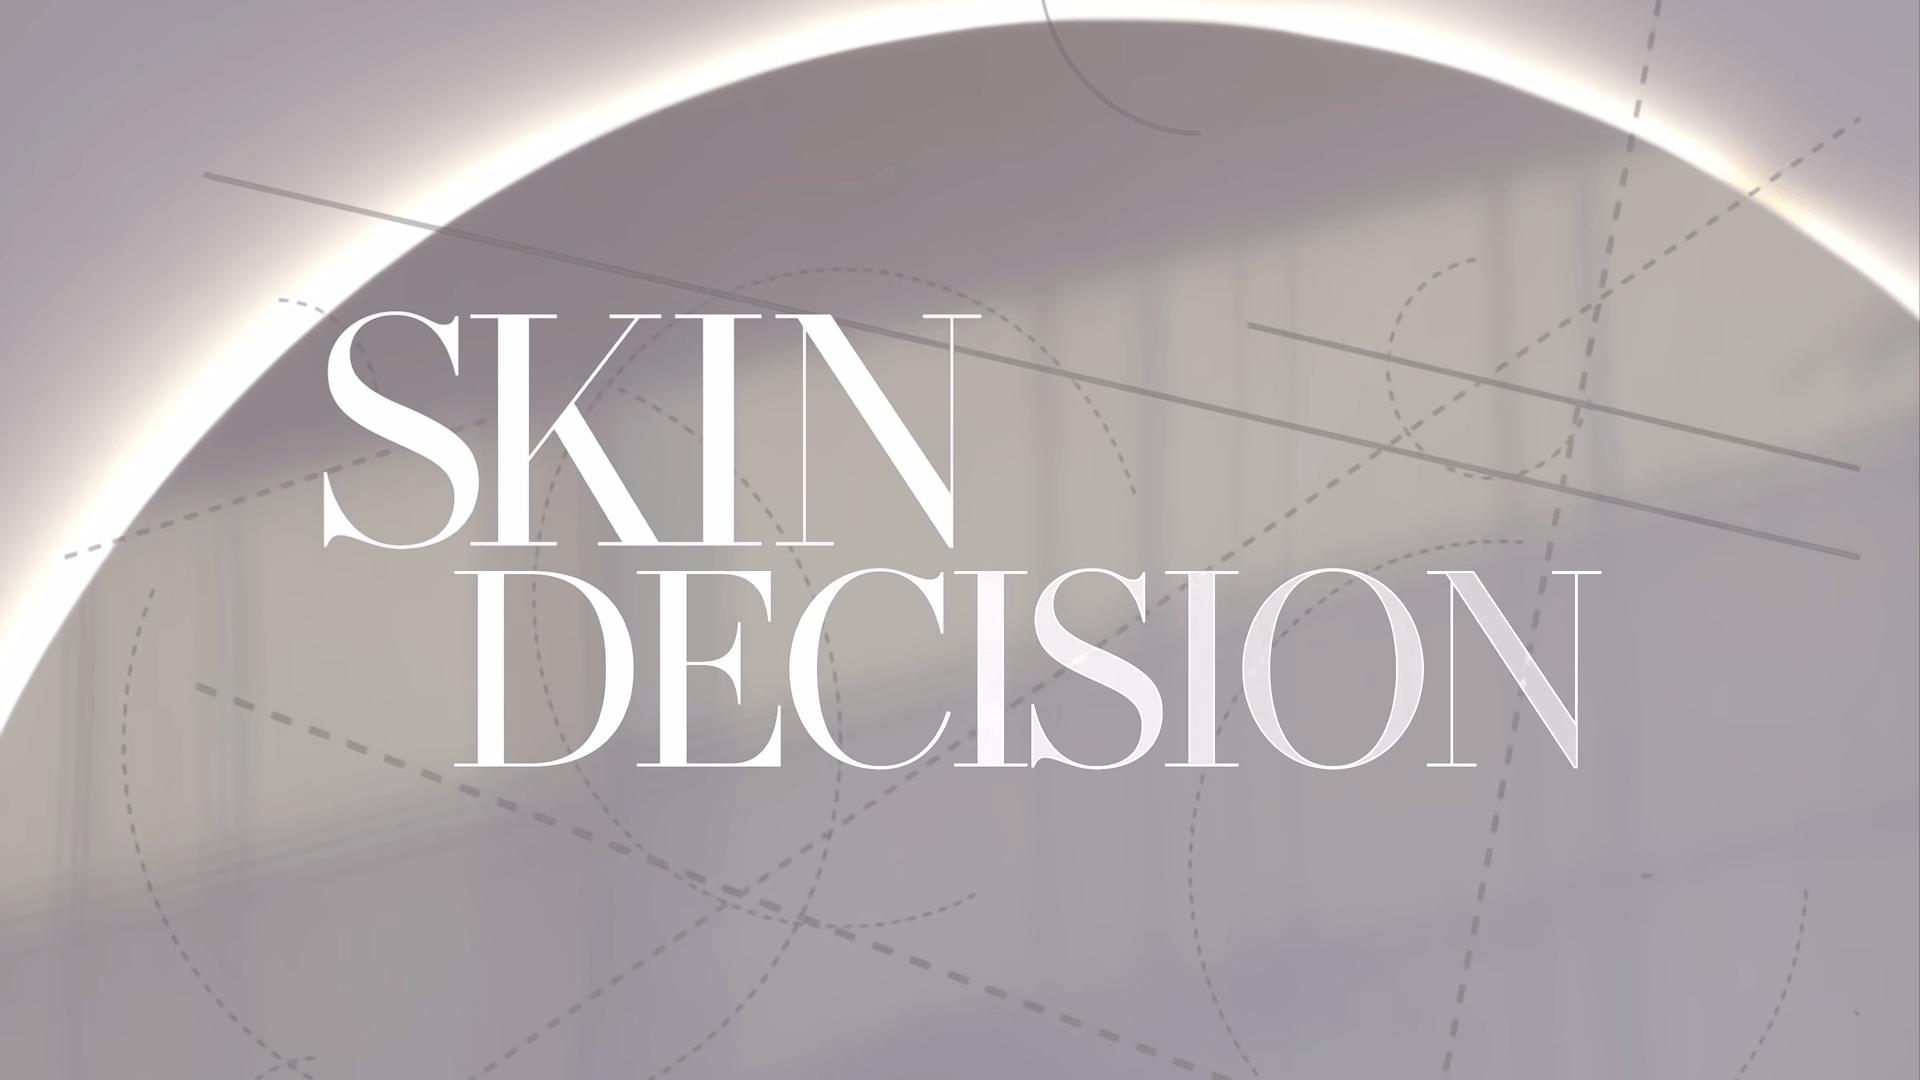 Skin Decision Before and After Netflix Trailer, Netflix Documentaries, Netflix Health Documentary, Coming to Netflix in July 2020